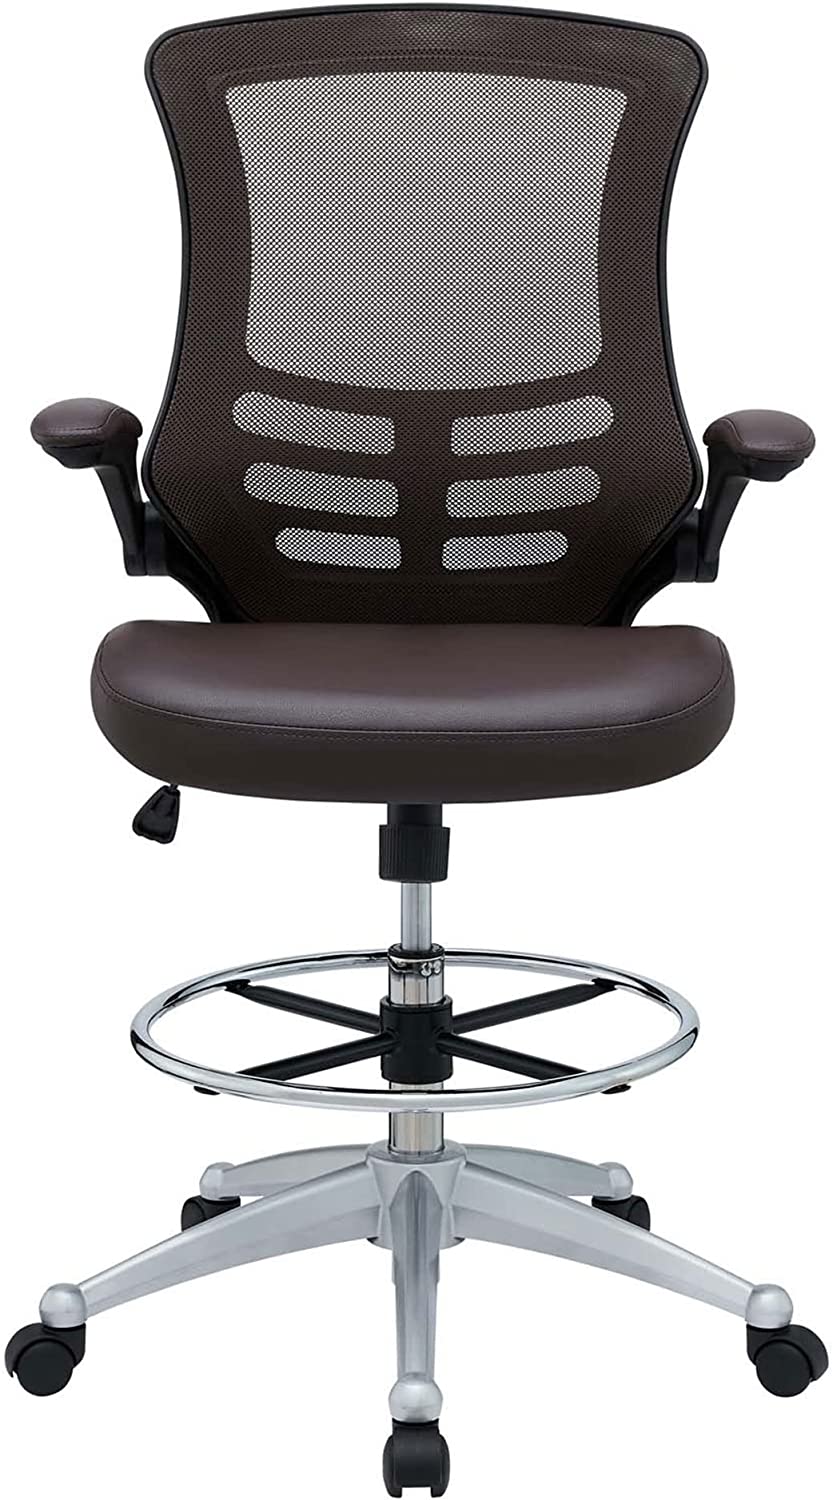 Modway Attainment Vinyl Drafting Chair - Drafting Stool With Flip-Up Arm in Brown